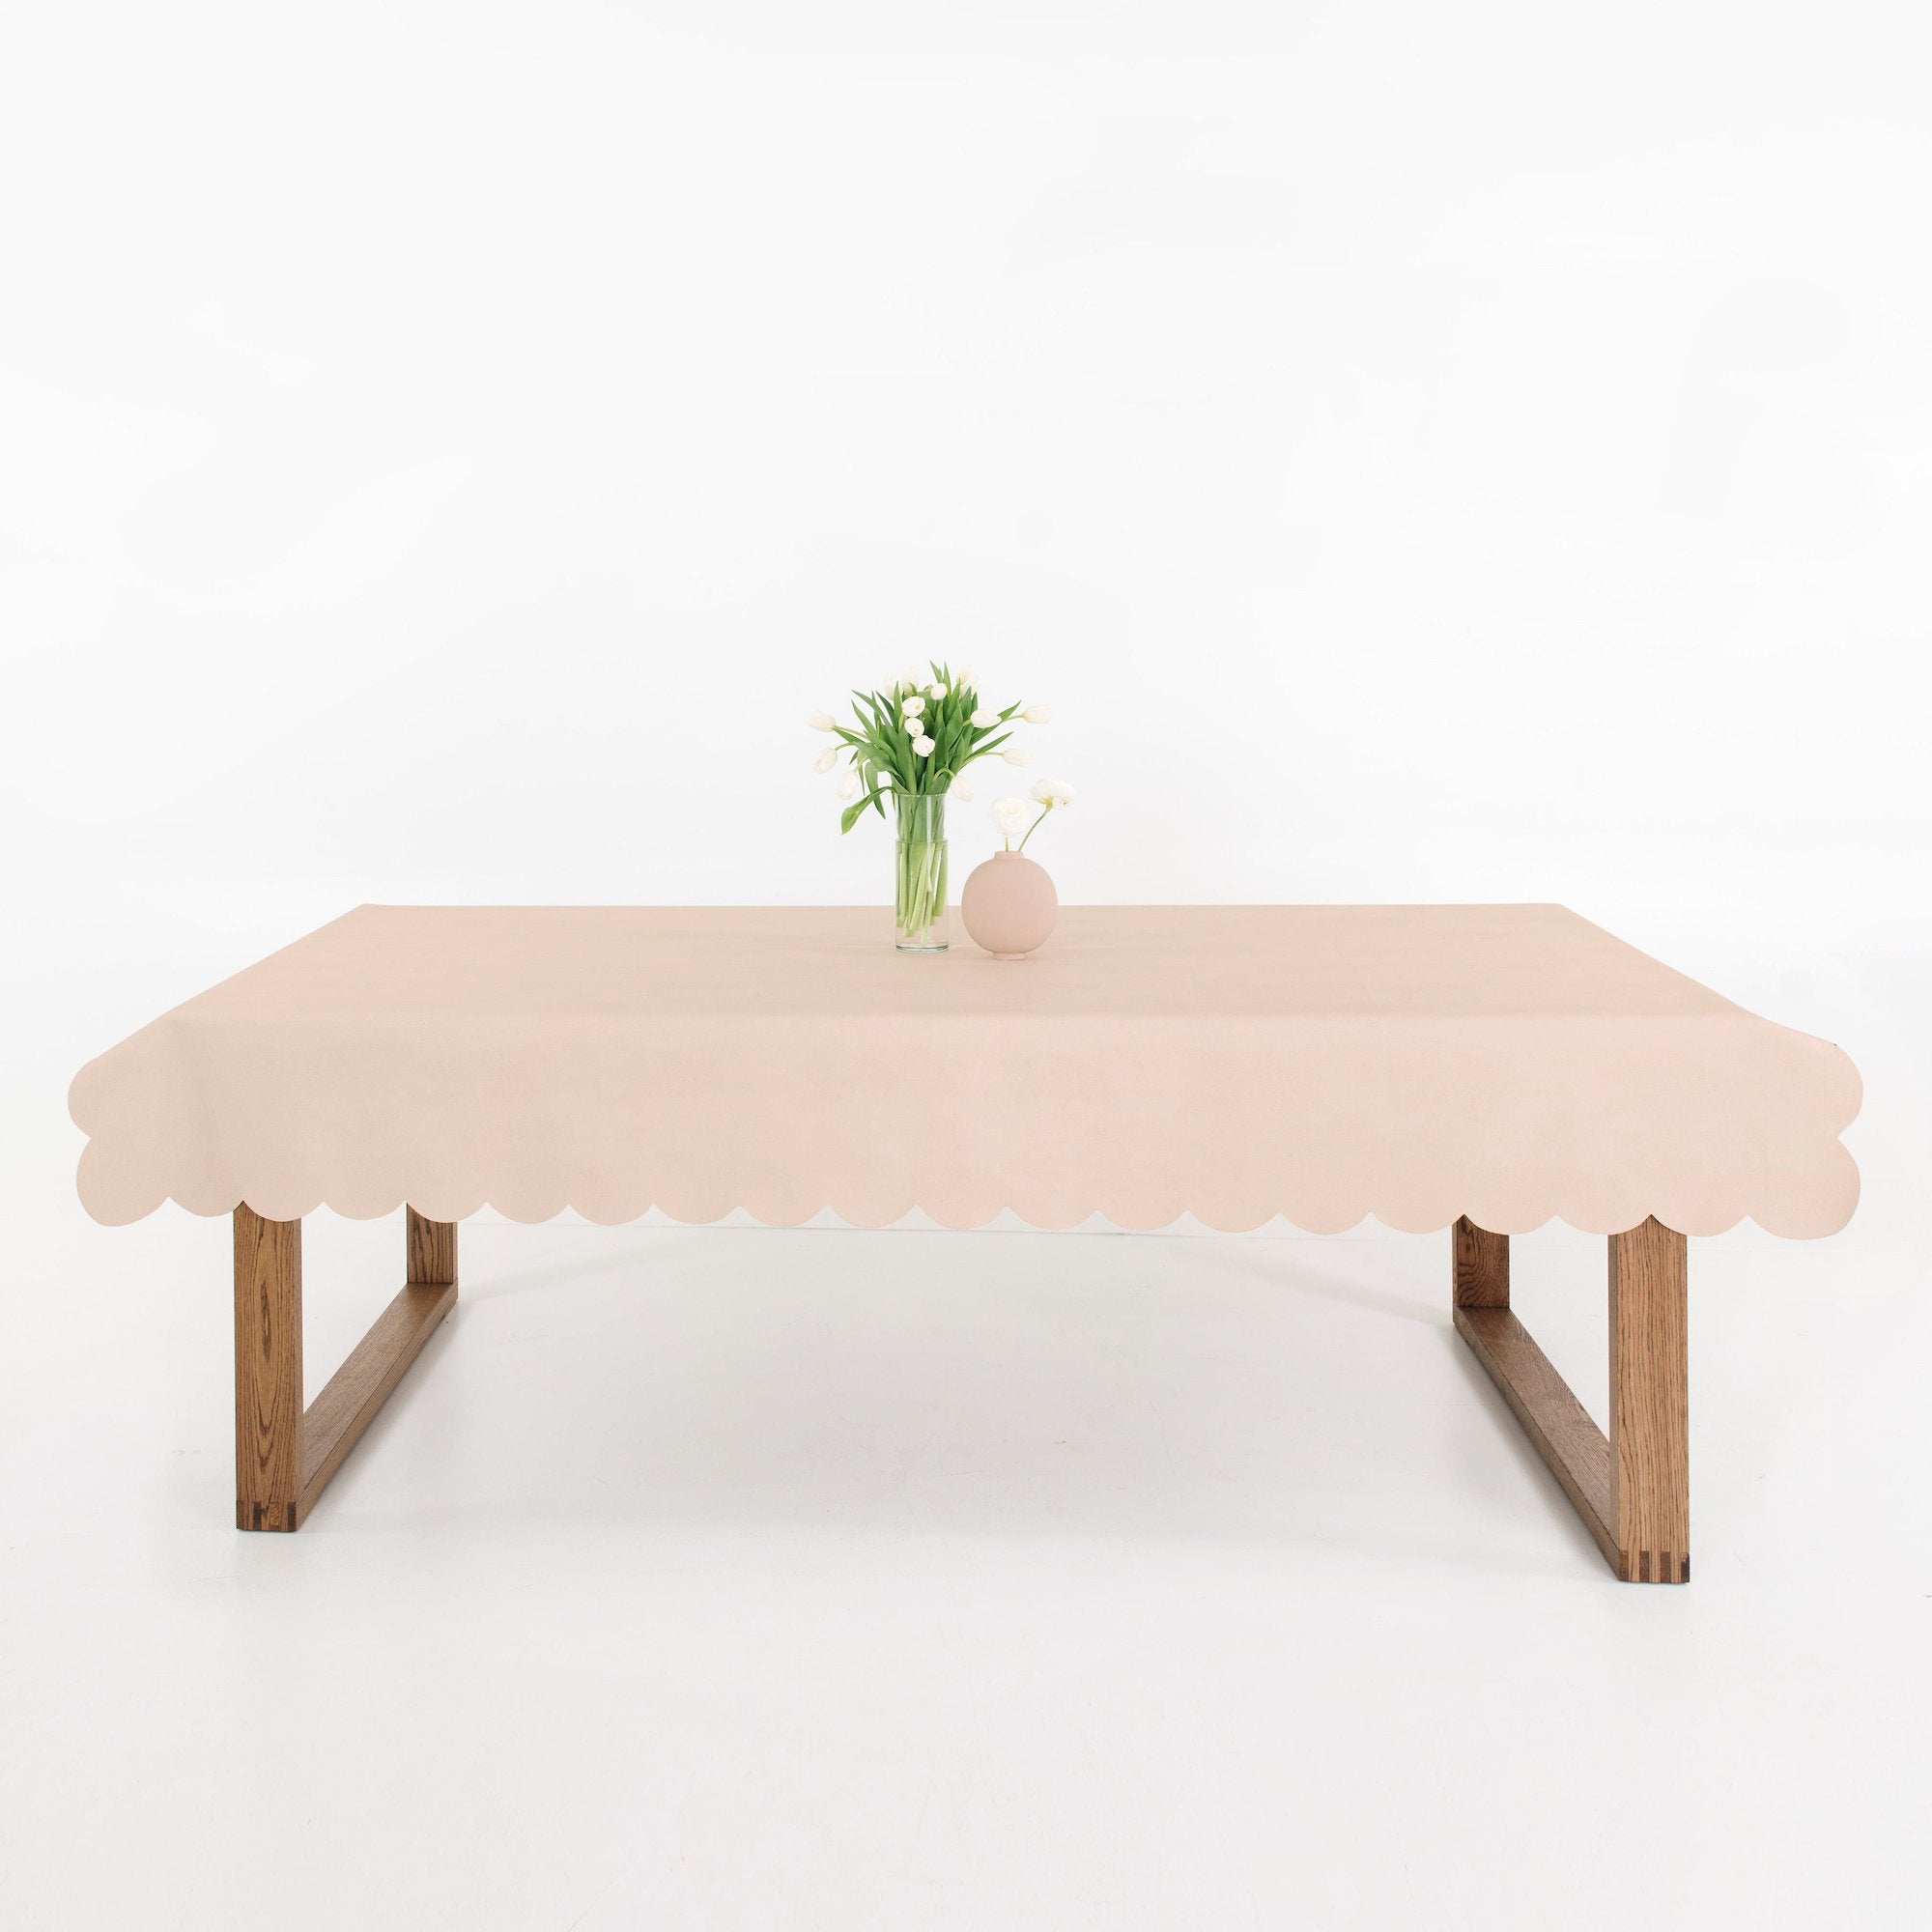 Untanned Scallop (on sale) / 8 Foot@Untanned Scallop Tablecloth on dining table